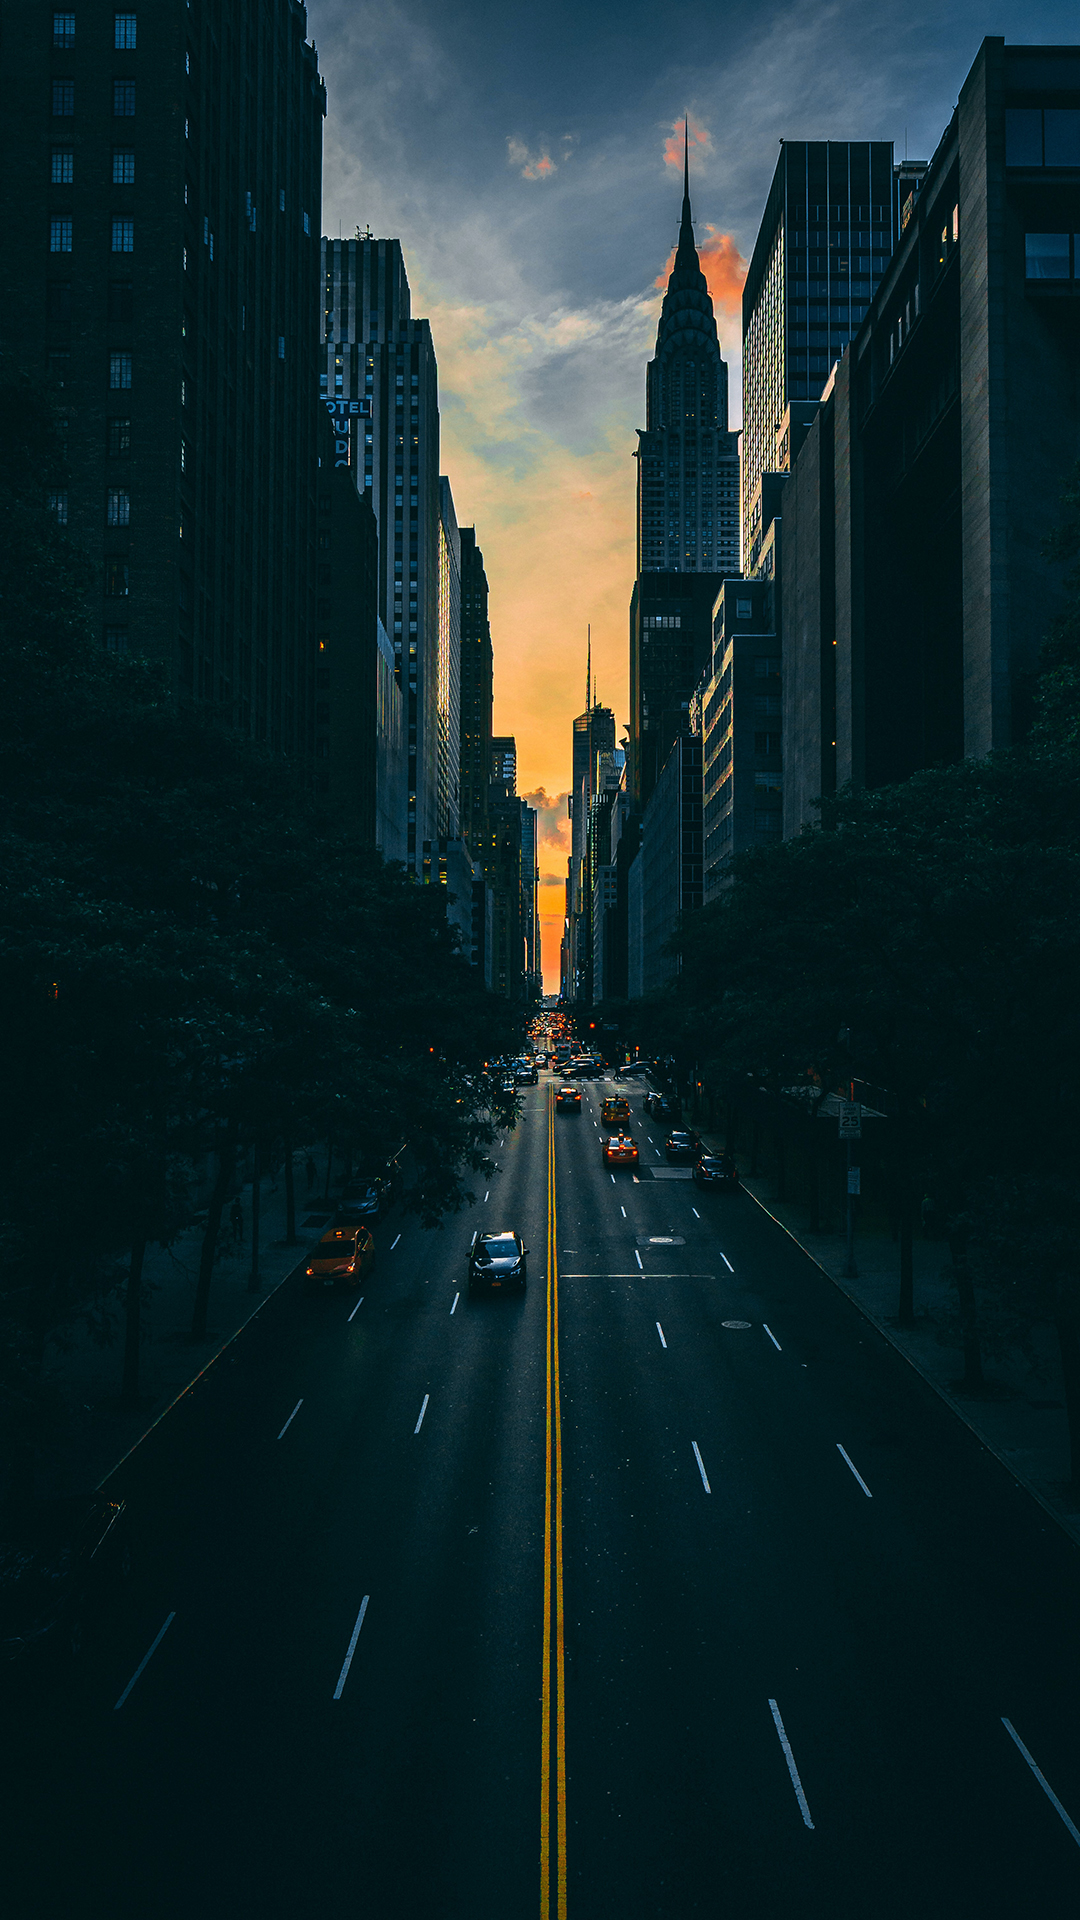 General 1080x1920 New York City urban sunset landscape street portrait display low light building sky clouds vehicle rear view sunset glow trees